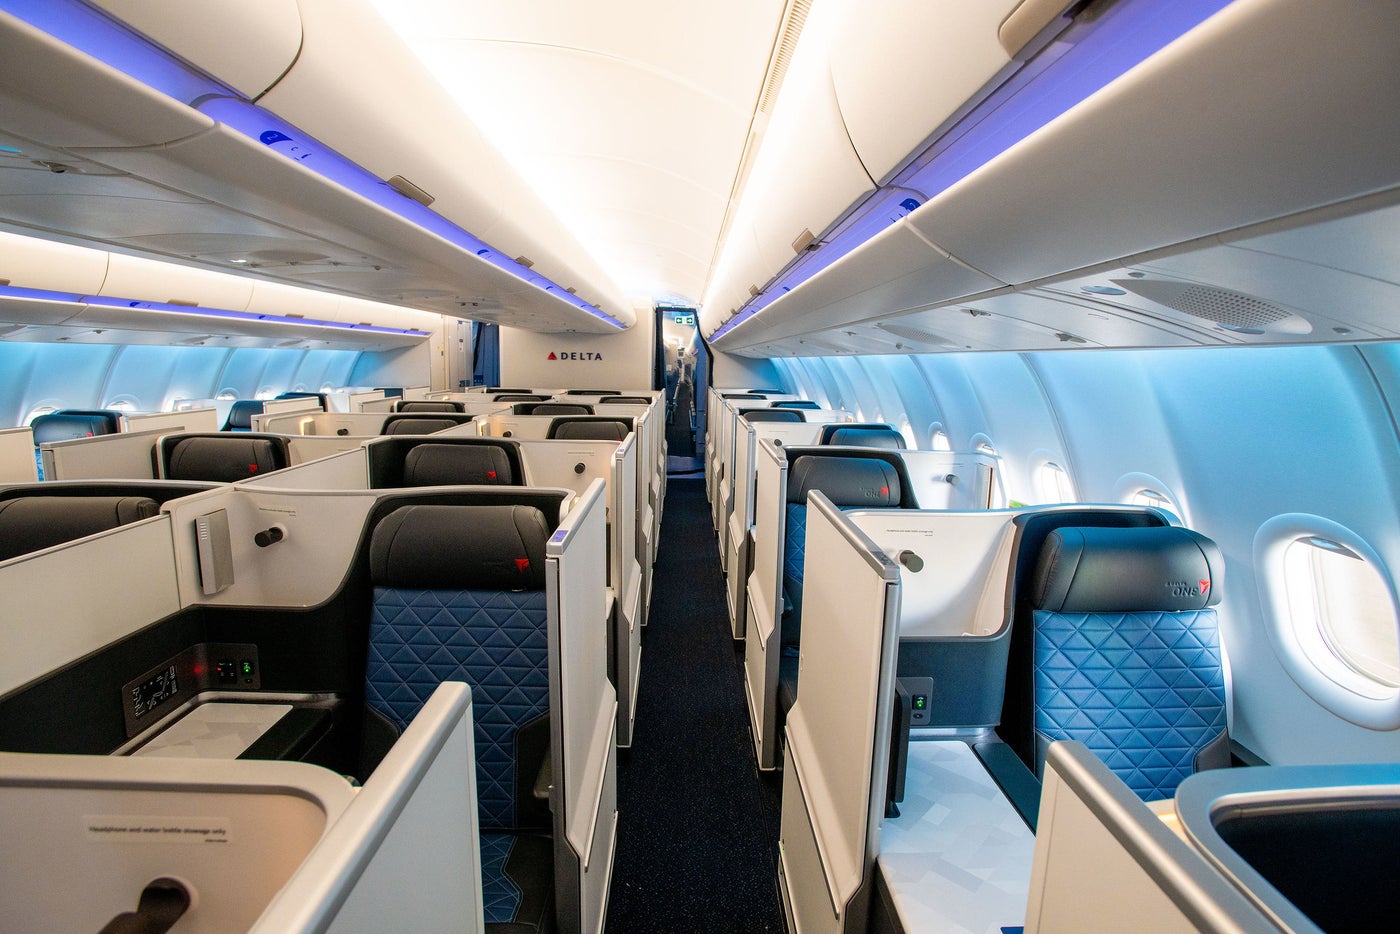 Here's a Early Glimpse at Delta's Newest Aircraft Interior